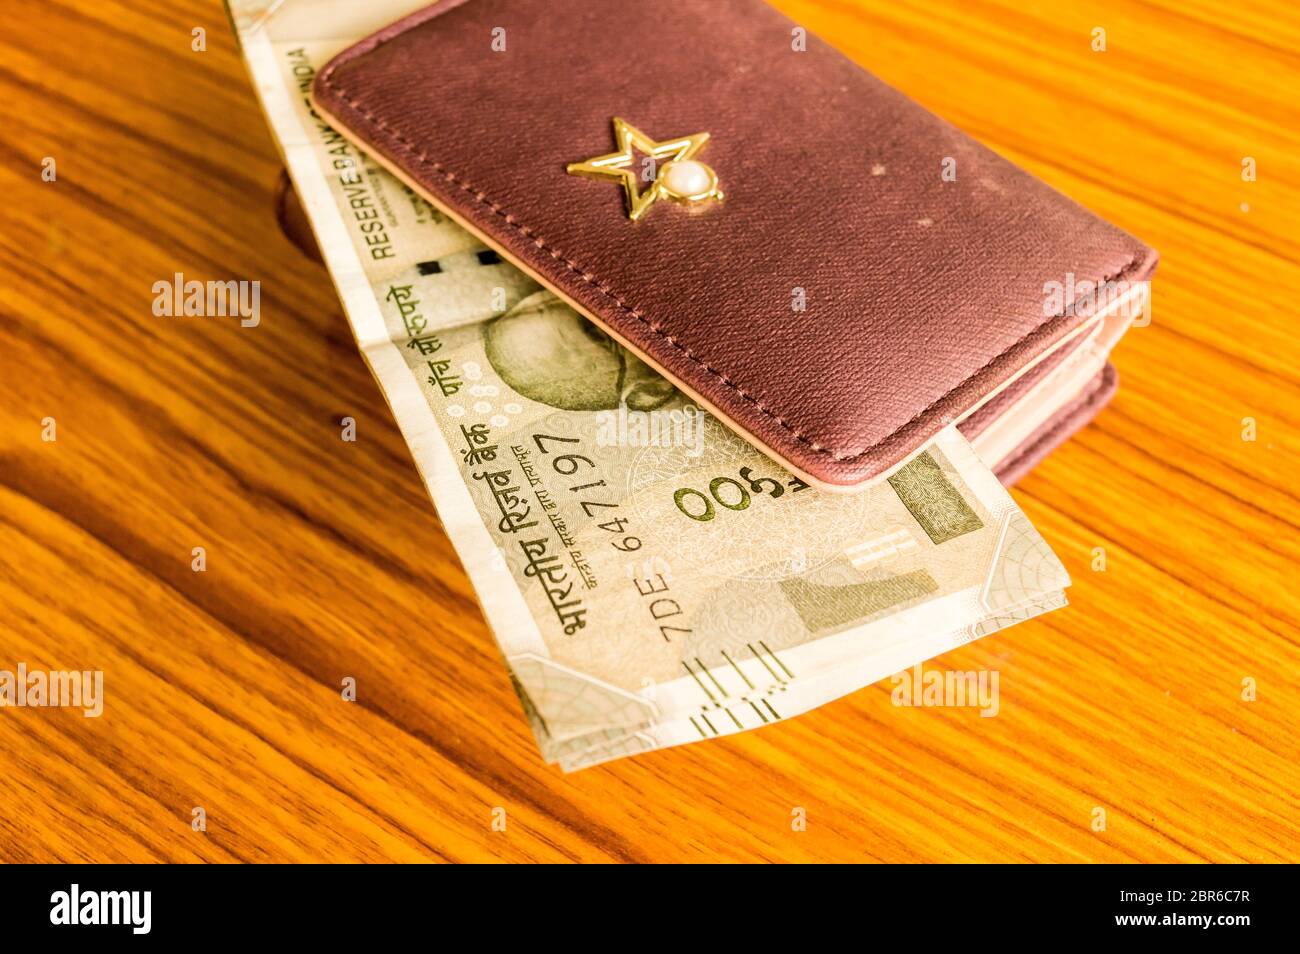 Indian Five Hundred 500 Rupee Cash Note in Brown Color Wallet Leather Purse  on a Wooden Table. Business Finance Economy Concept Stock Image - Image of  economy, colored: 143041121